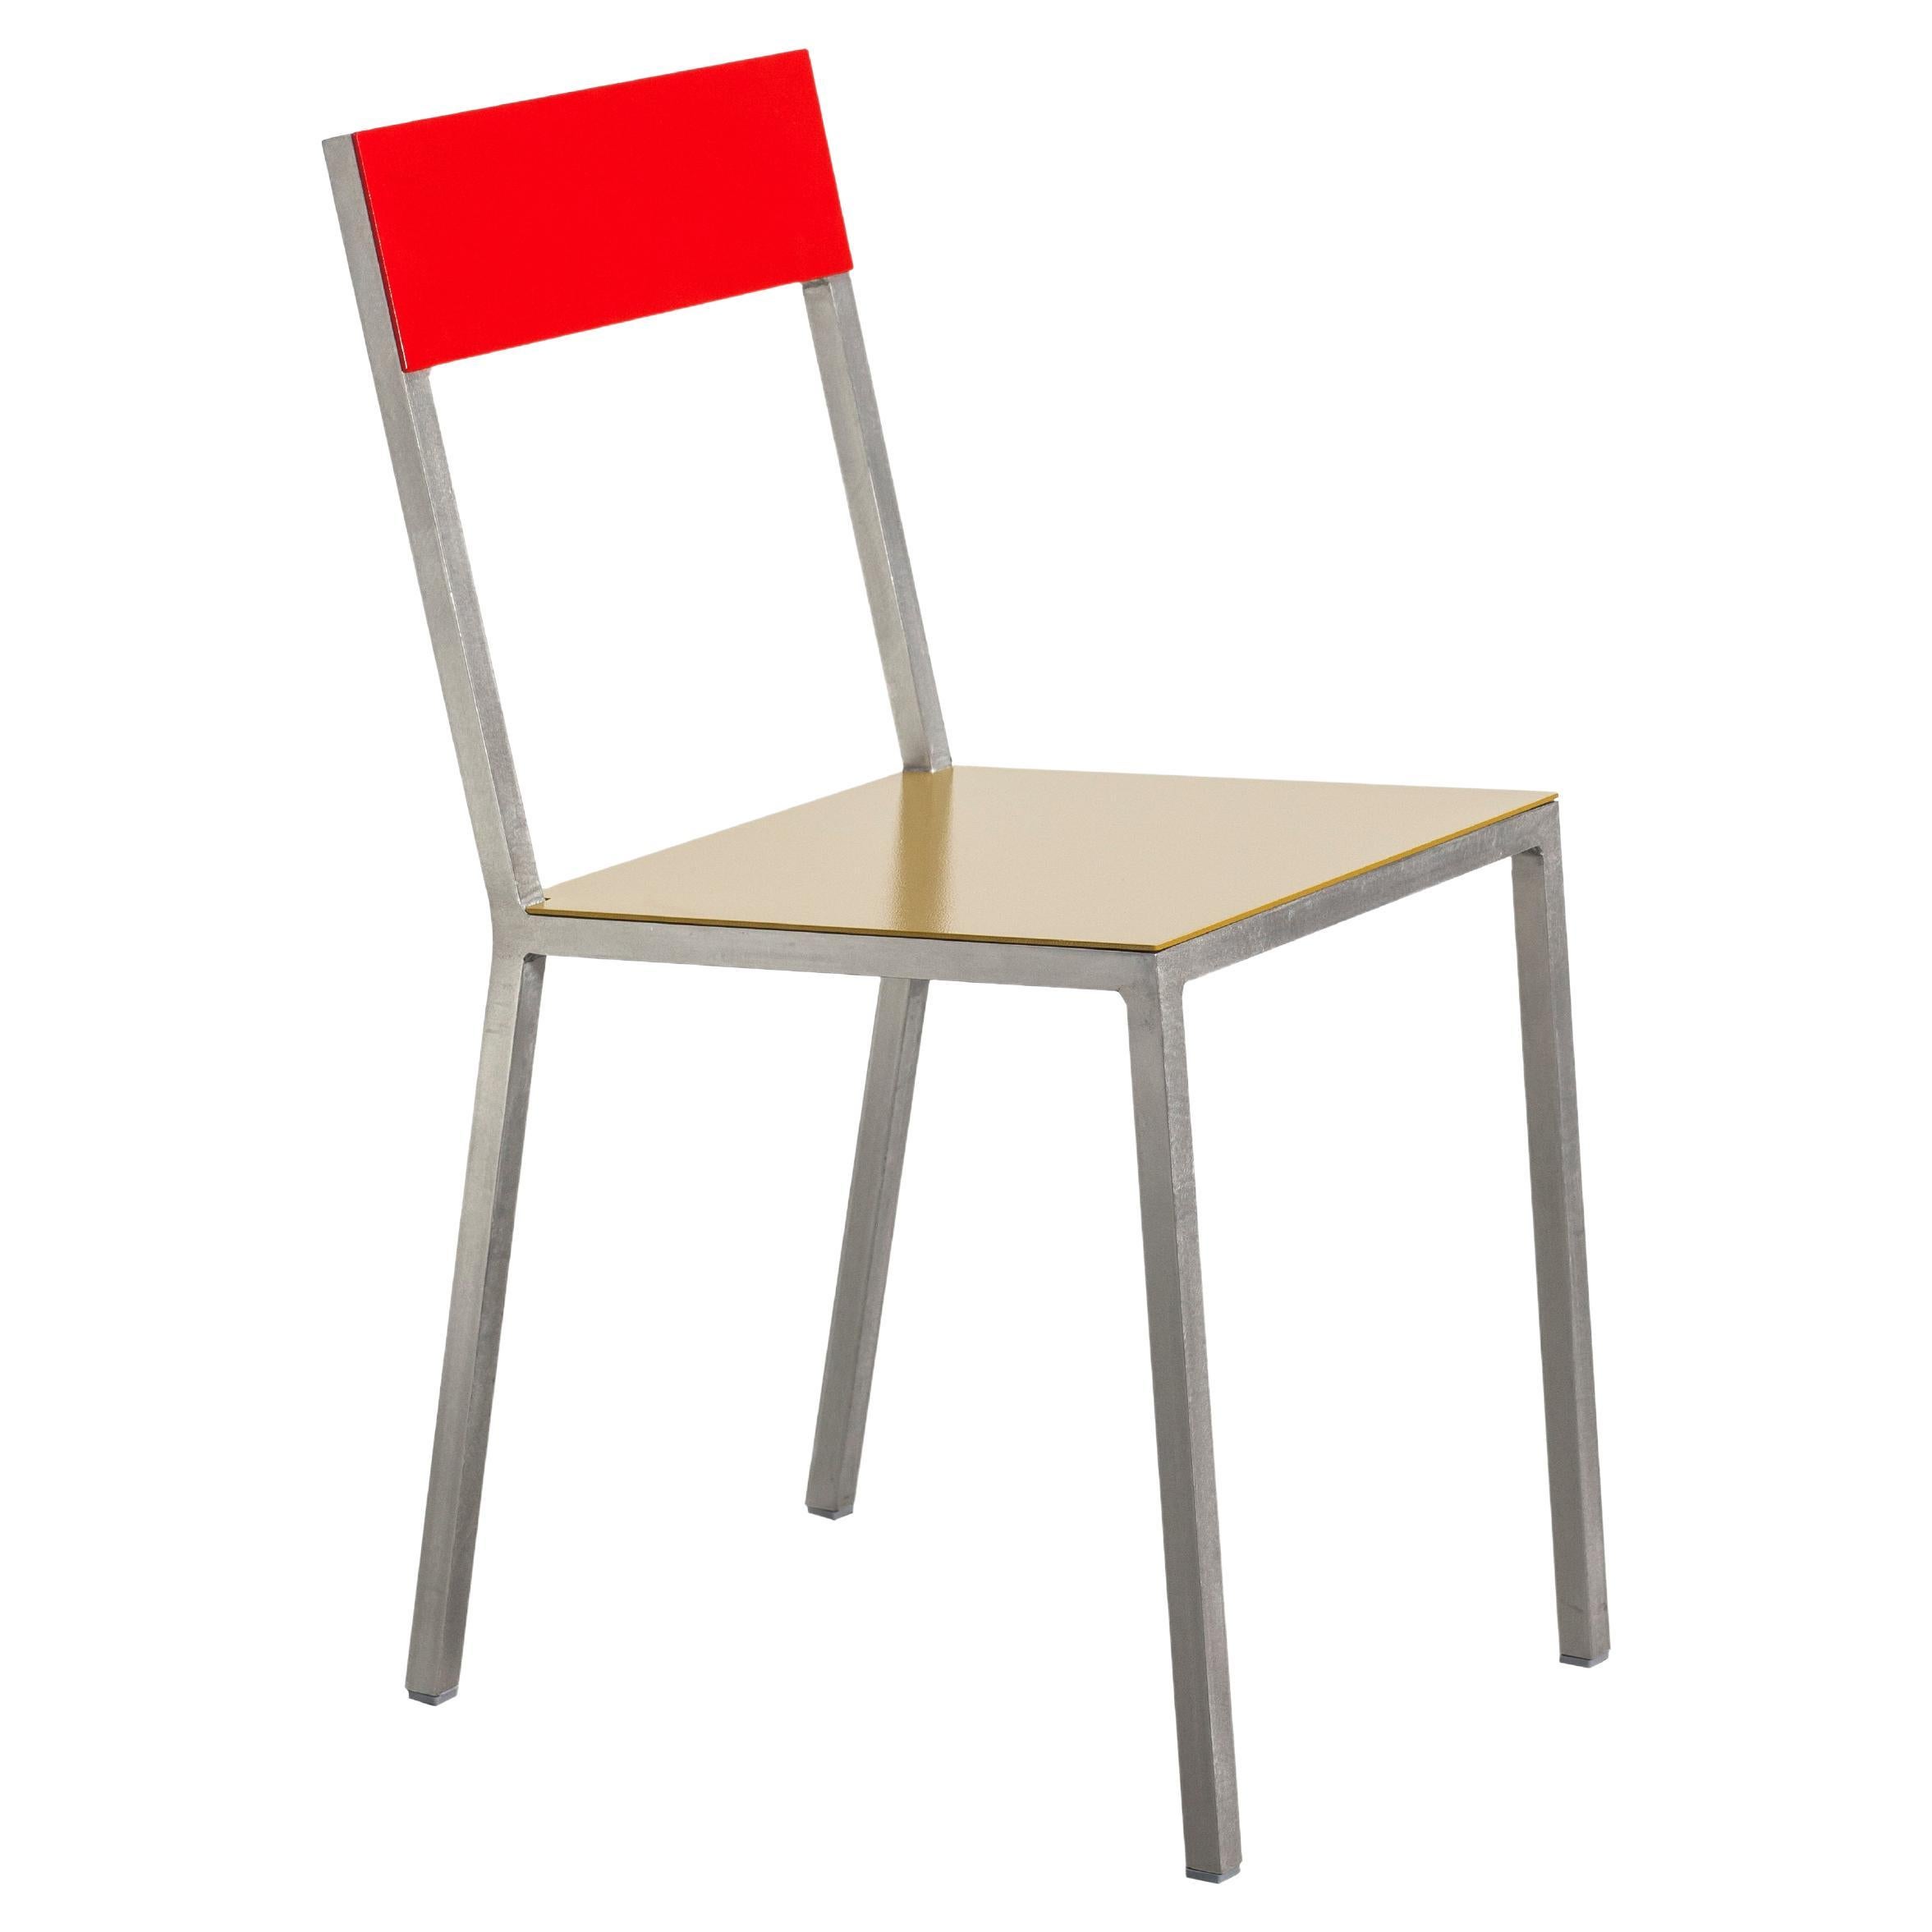 Contemporary Chair 'ALU' by Muller Van Severen x Valerie Objetcs, Red + Curry For Sale